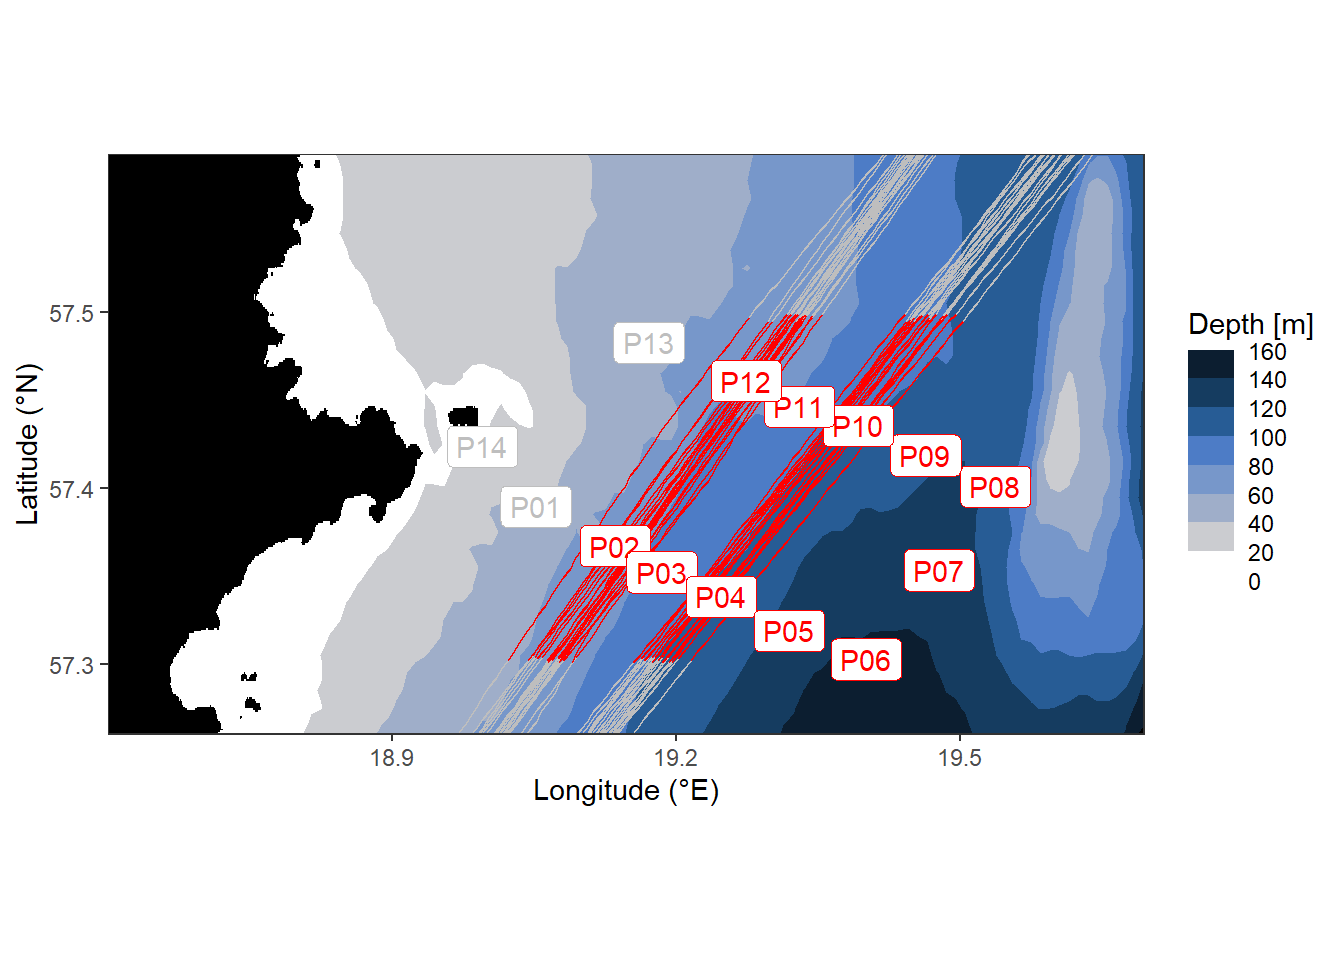 Location of stations sampled between the east coast of Gotland and Gotland deep.